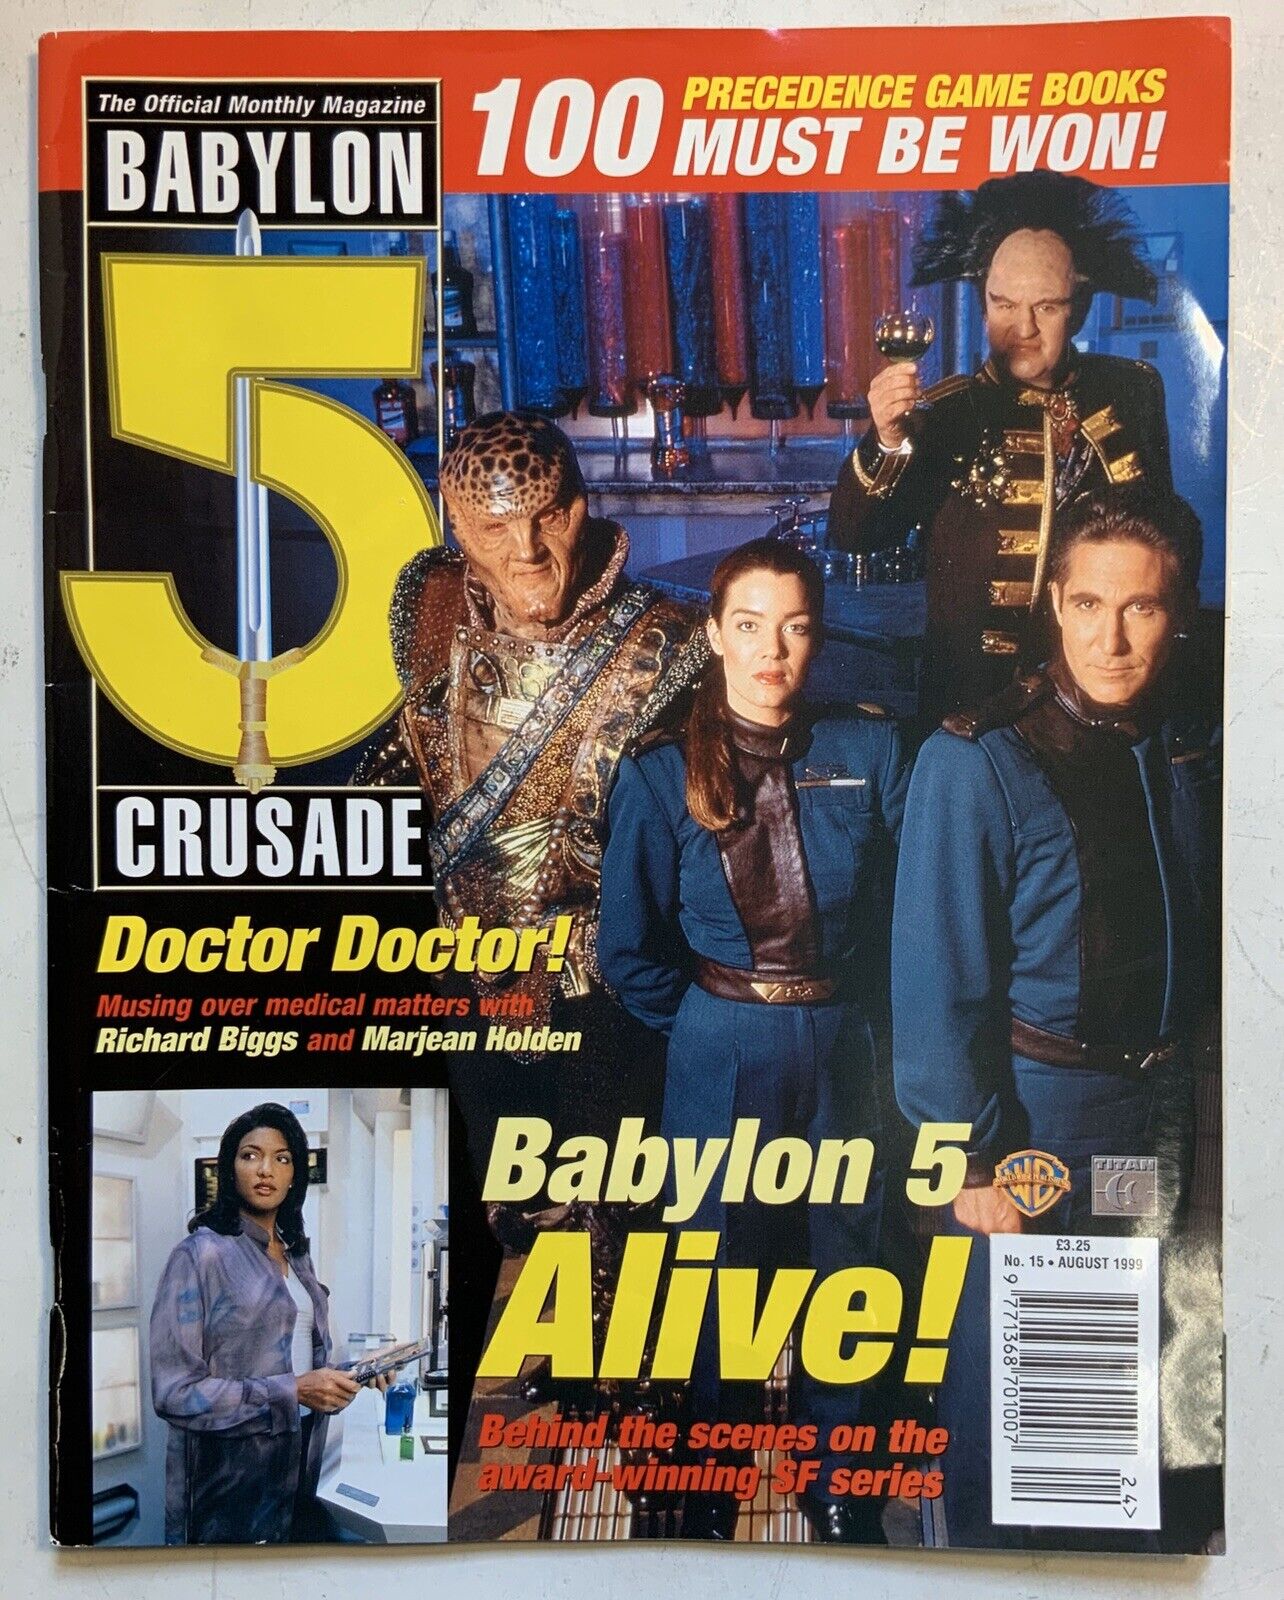 Babylon 5 The Official Monthly Magazine August 1999 Vol 2 No 15 Richard Biggs